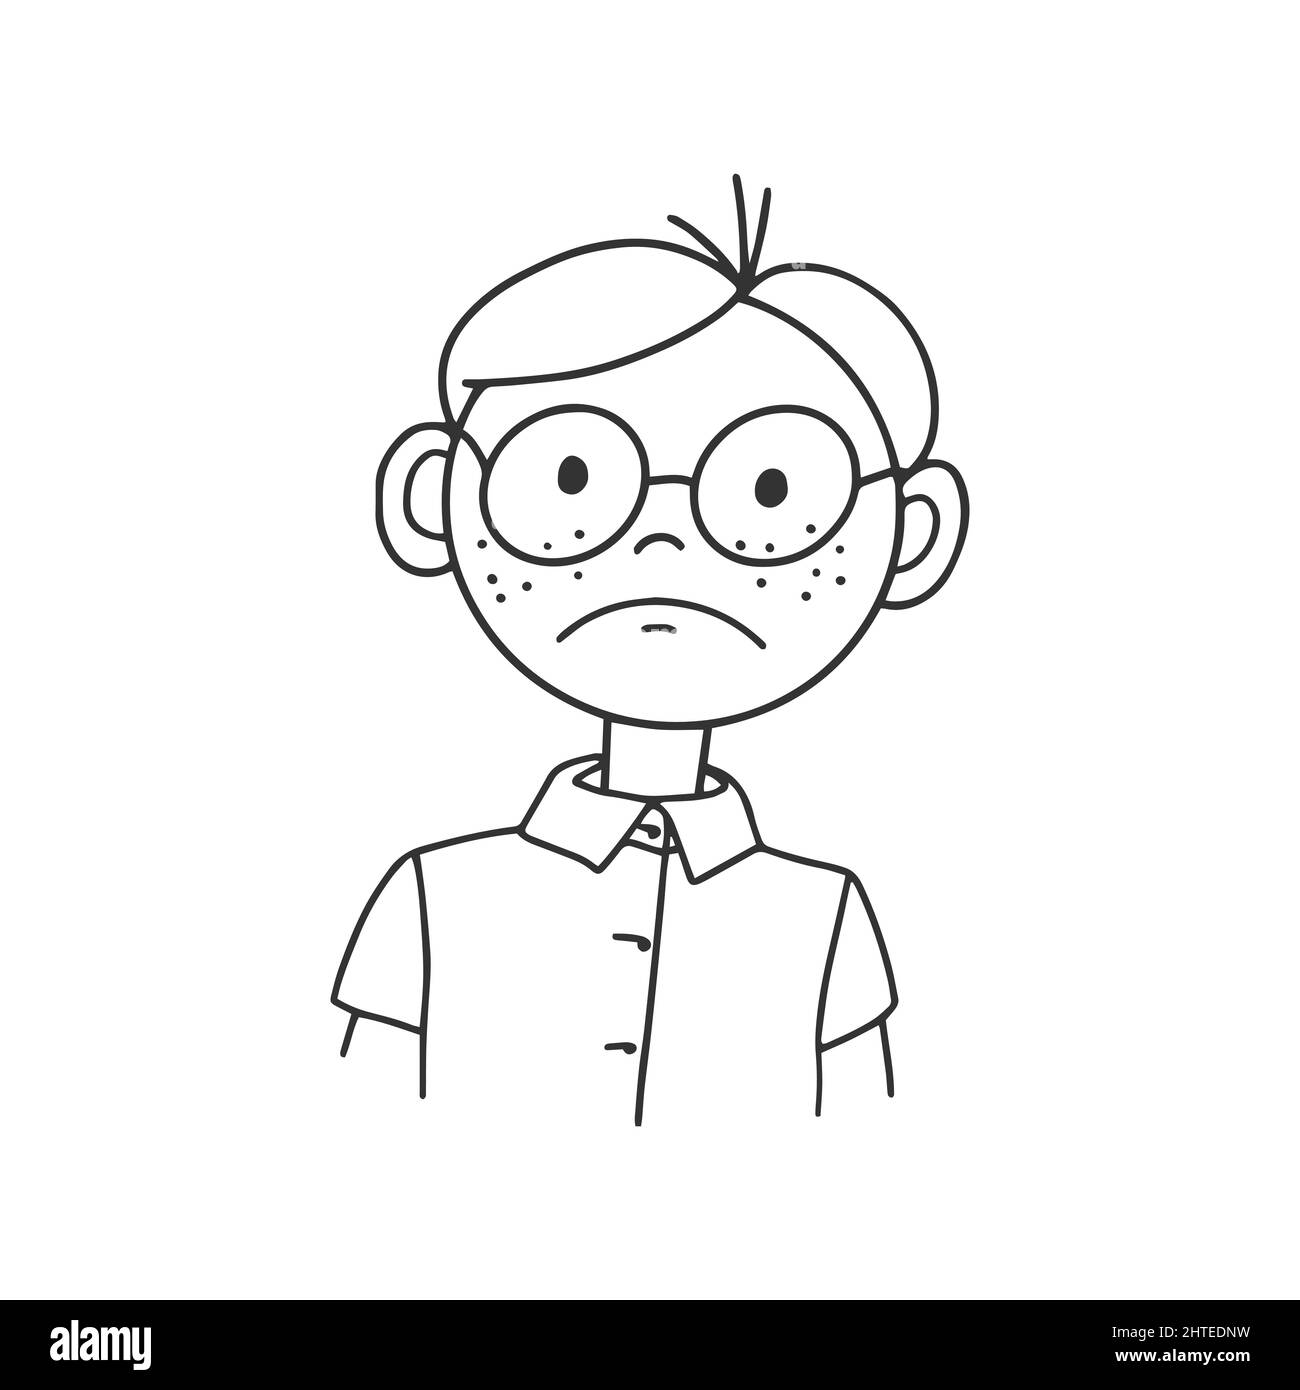 Contour drawing of a cartoon man with glasses. Doodle styleContour drawing of a cartoon man in glasses with emotions on his face. Doodle style Stock Vector